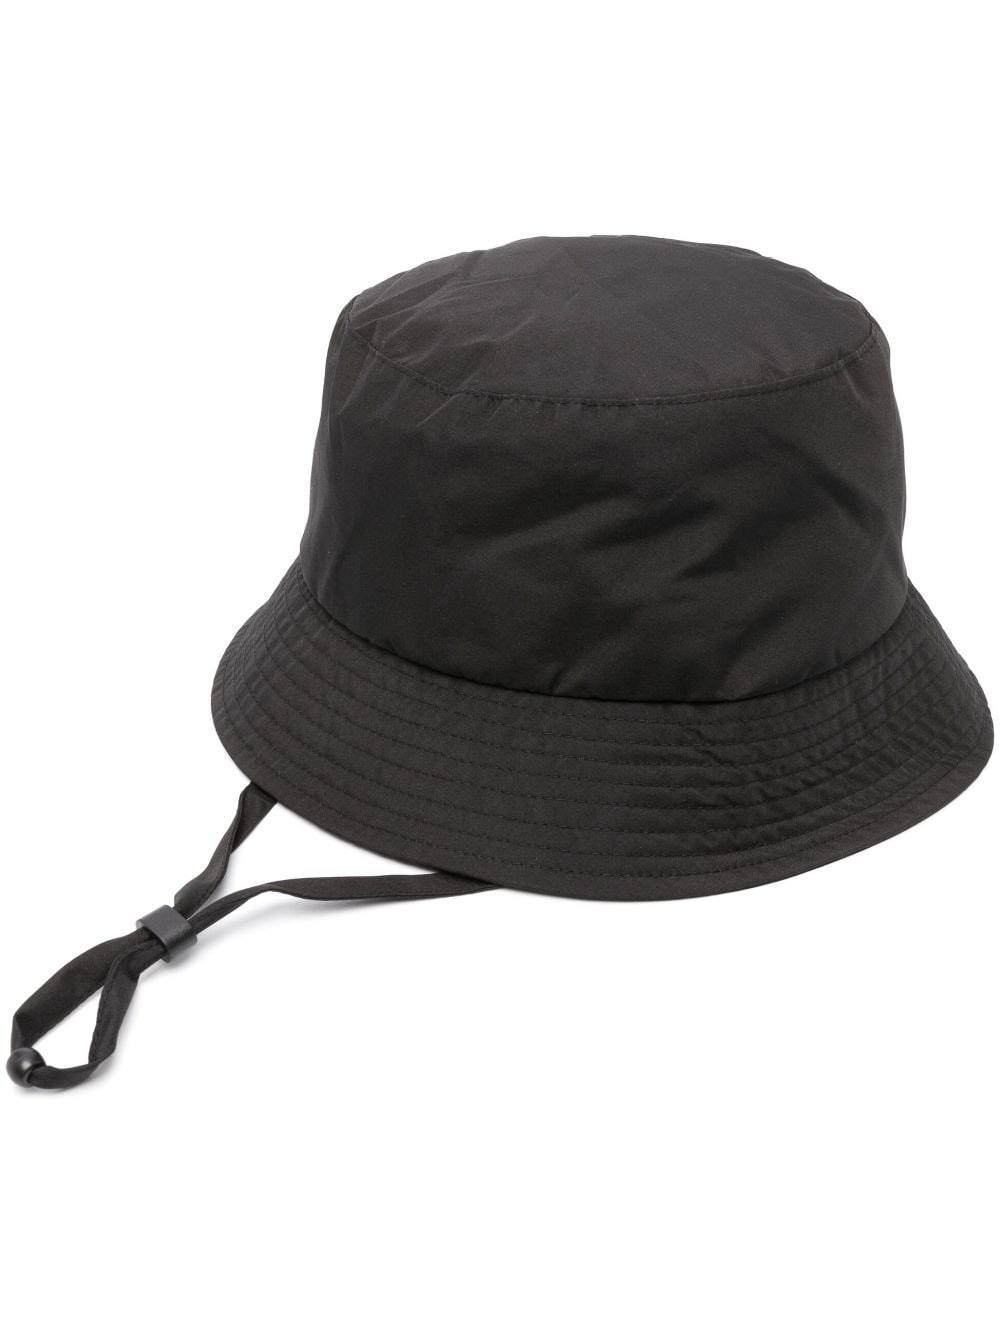 NORSE PROJECTS GORE-TEX LOGO-PRINT BUCKET HAT